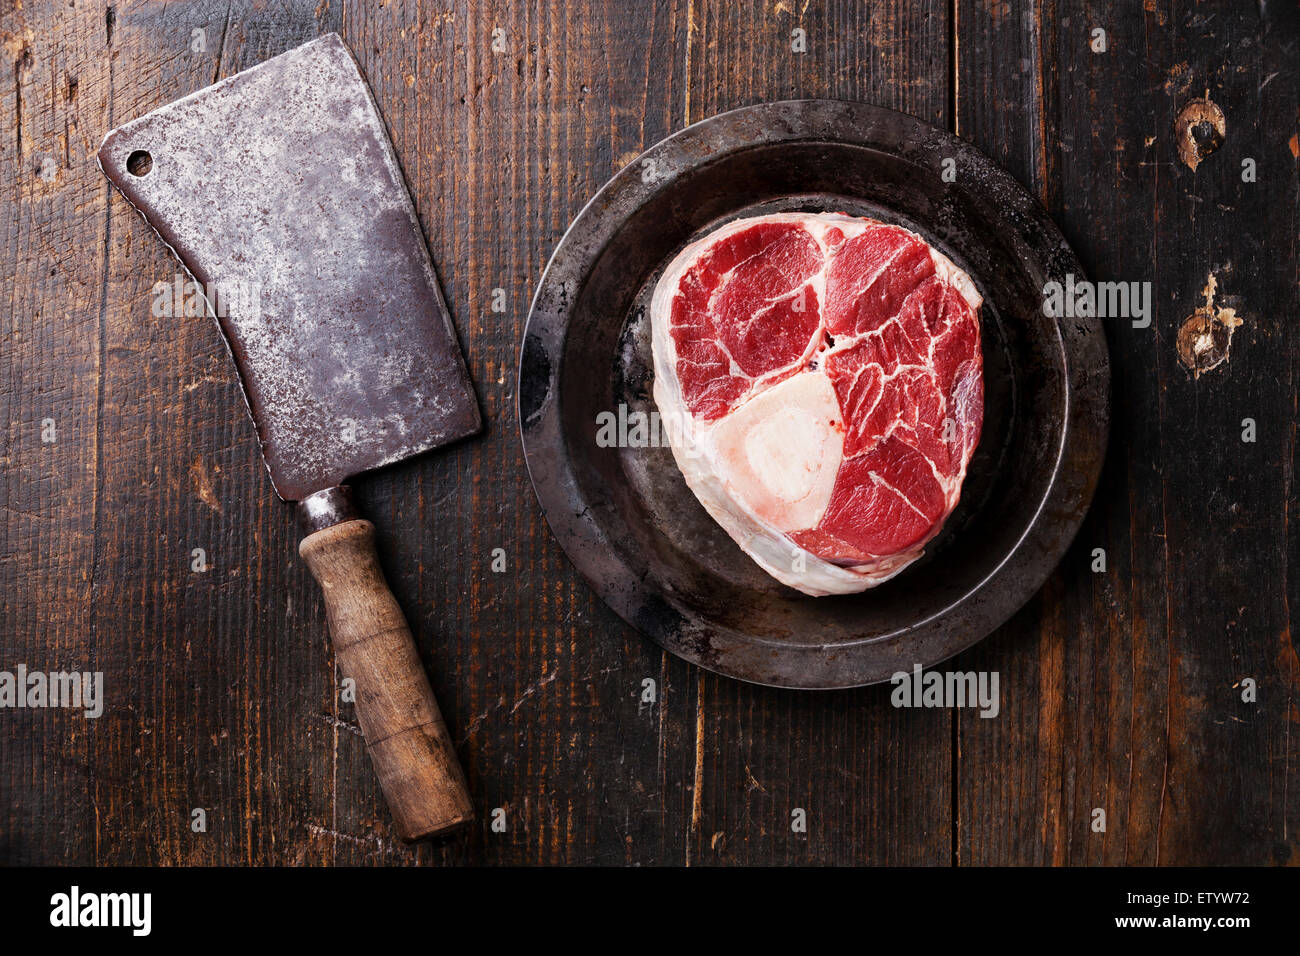 https://c8.alamy.com/comp/ETYW72/raw-fresh-cross-cut-veal-shank-for-making-osso-buco-and-meat-cleaver-ETYW72.jpg